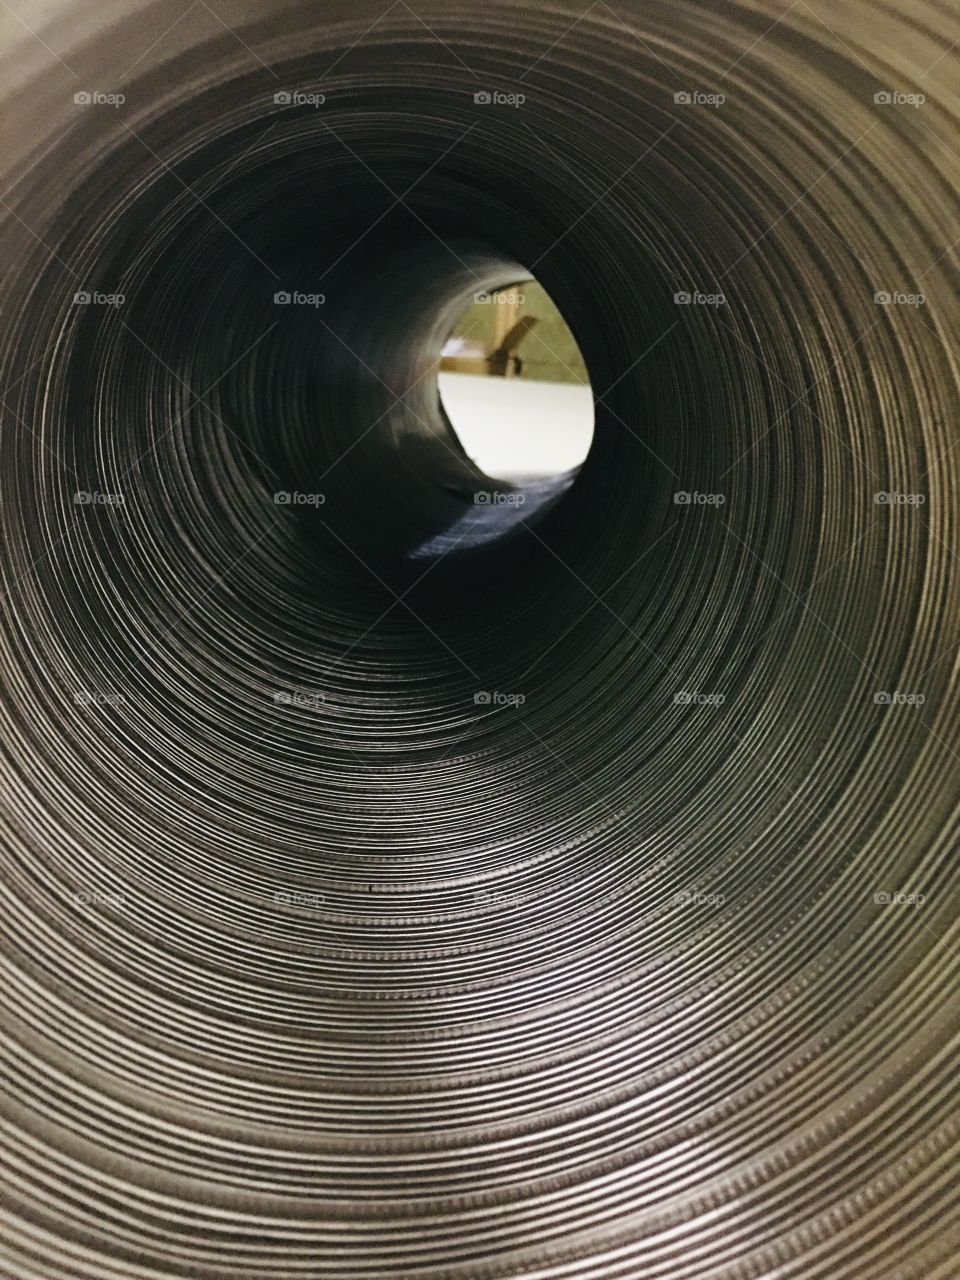 Looking through a textured tube